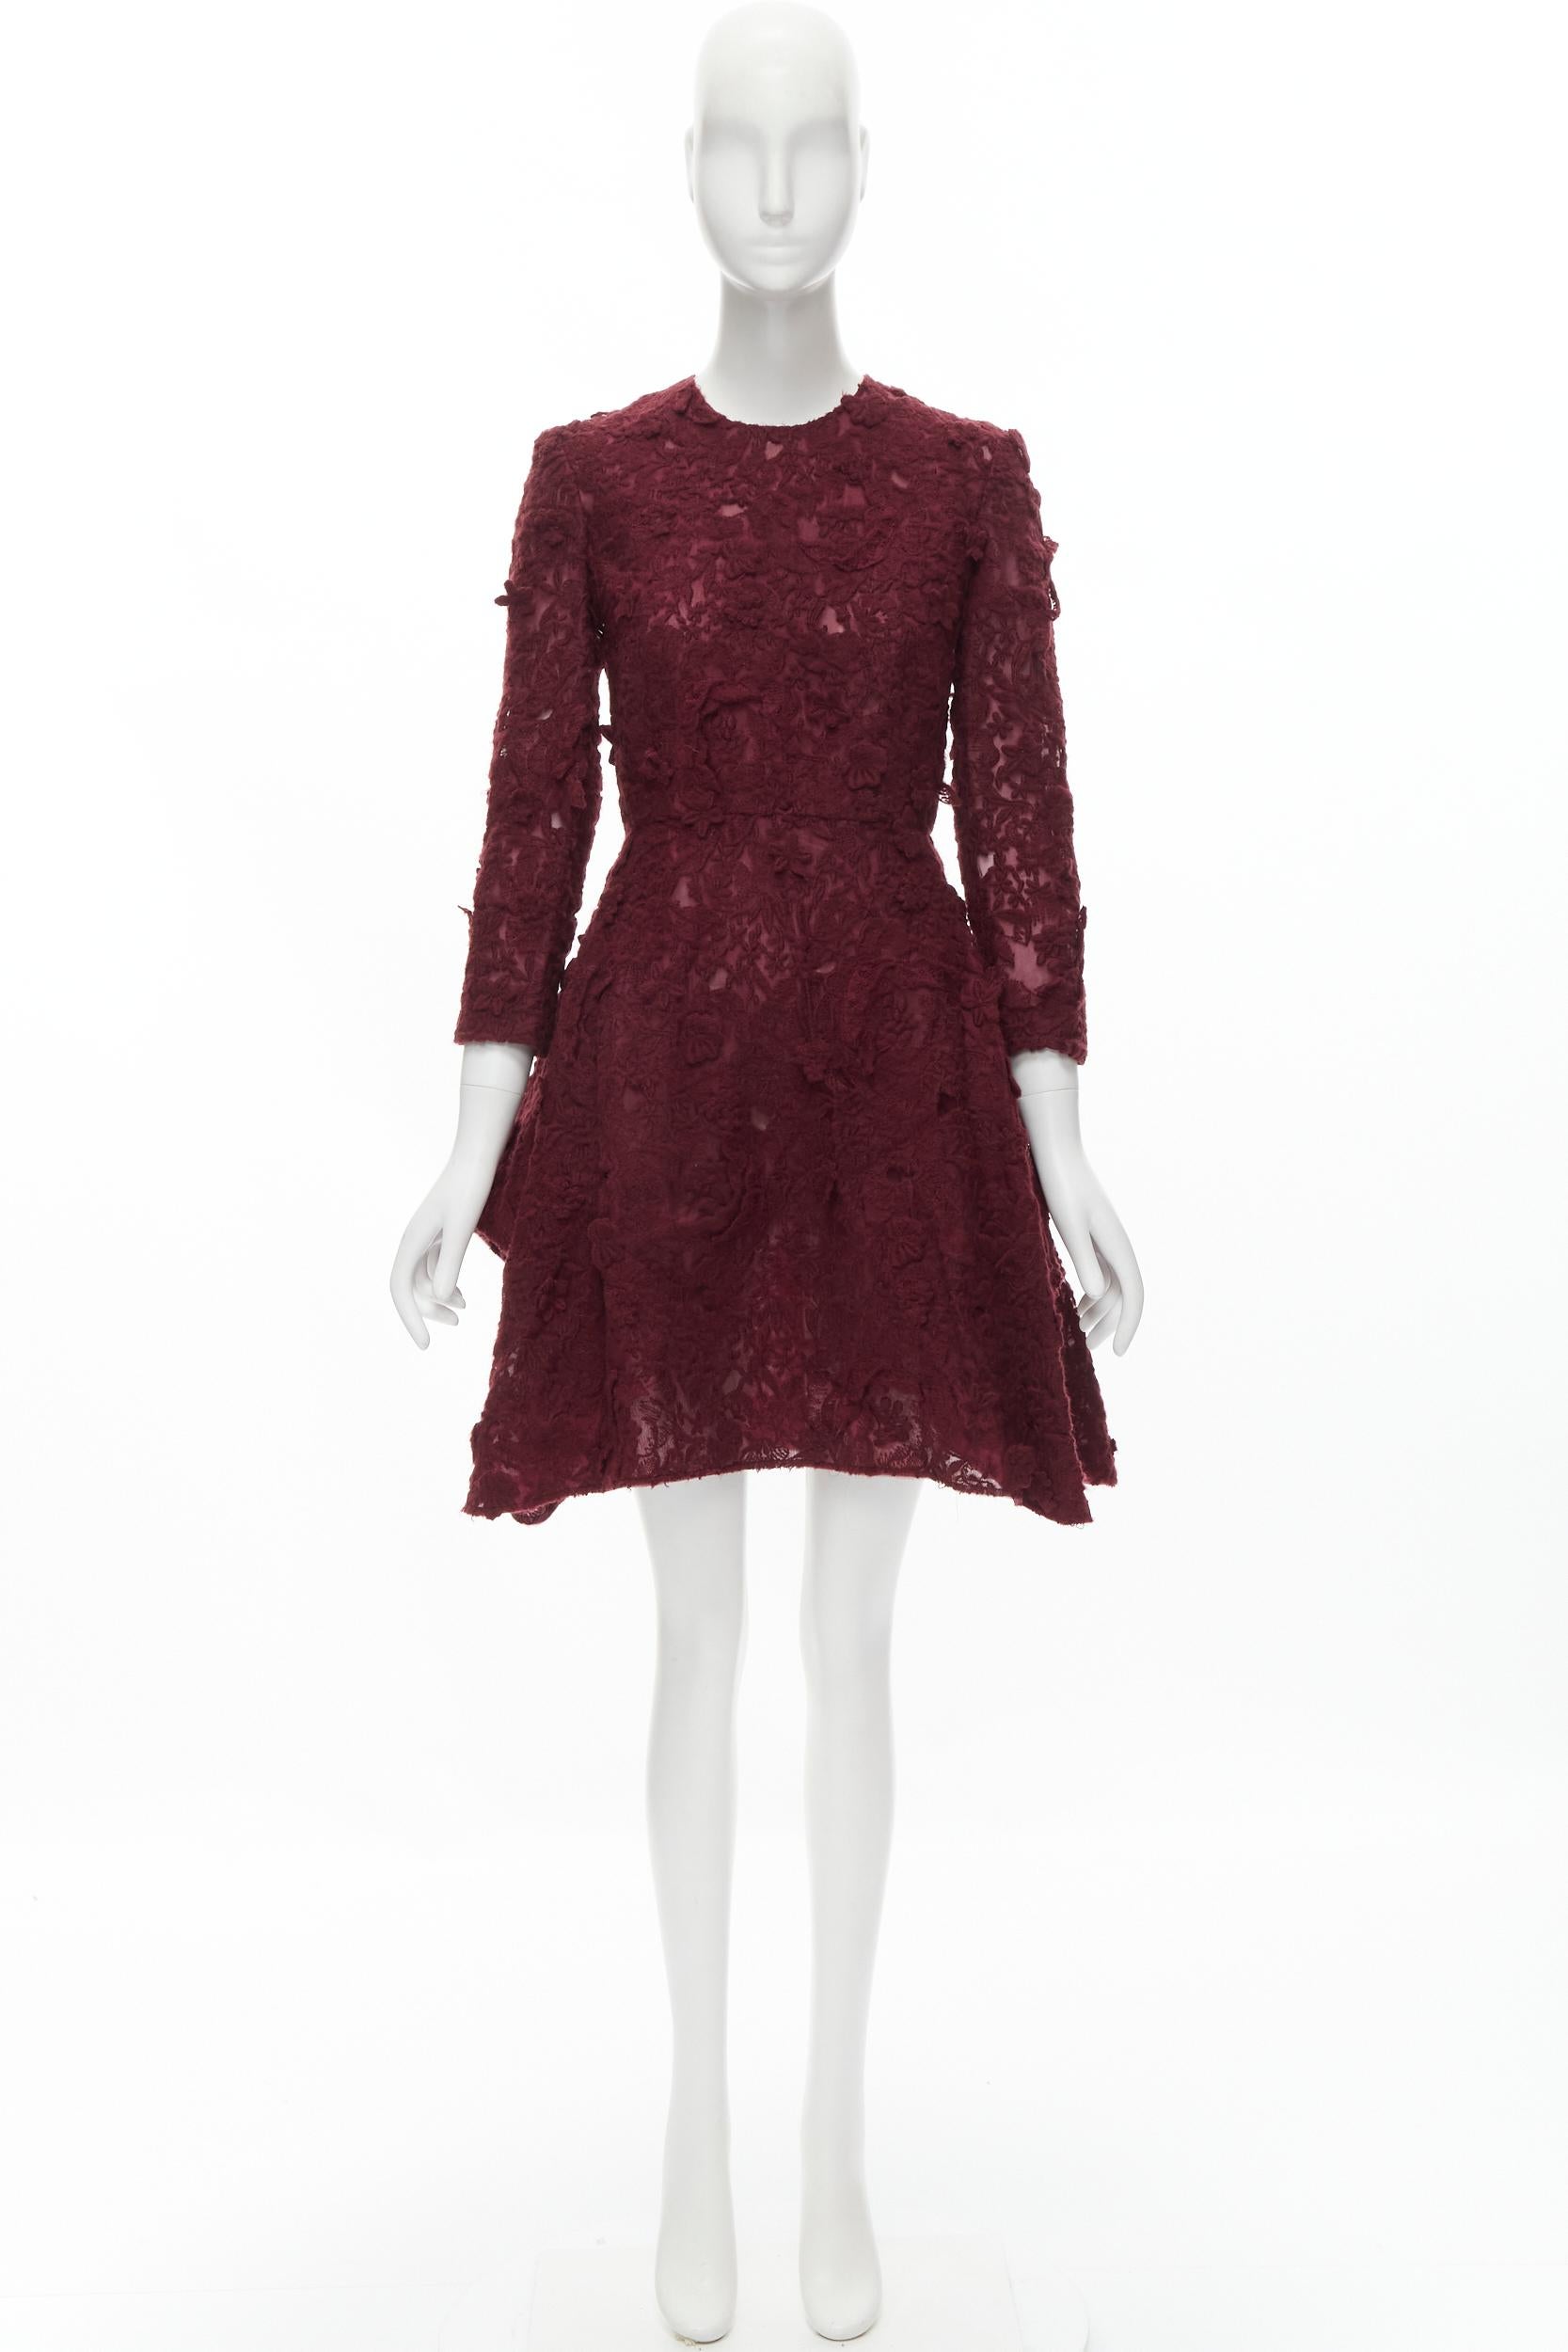 GIAMBATTISTA VALLI burgundy red floral 3D lace fit flared cocktail dress XS For Sale 1